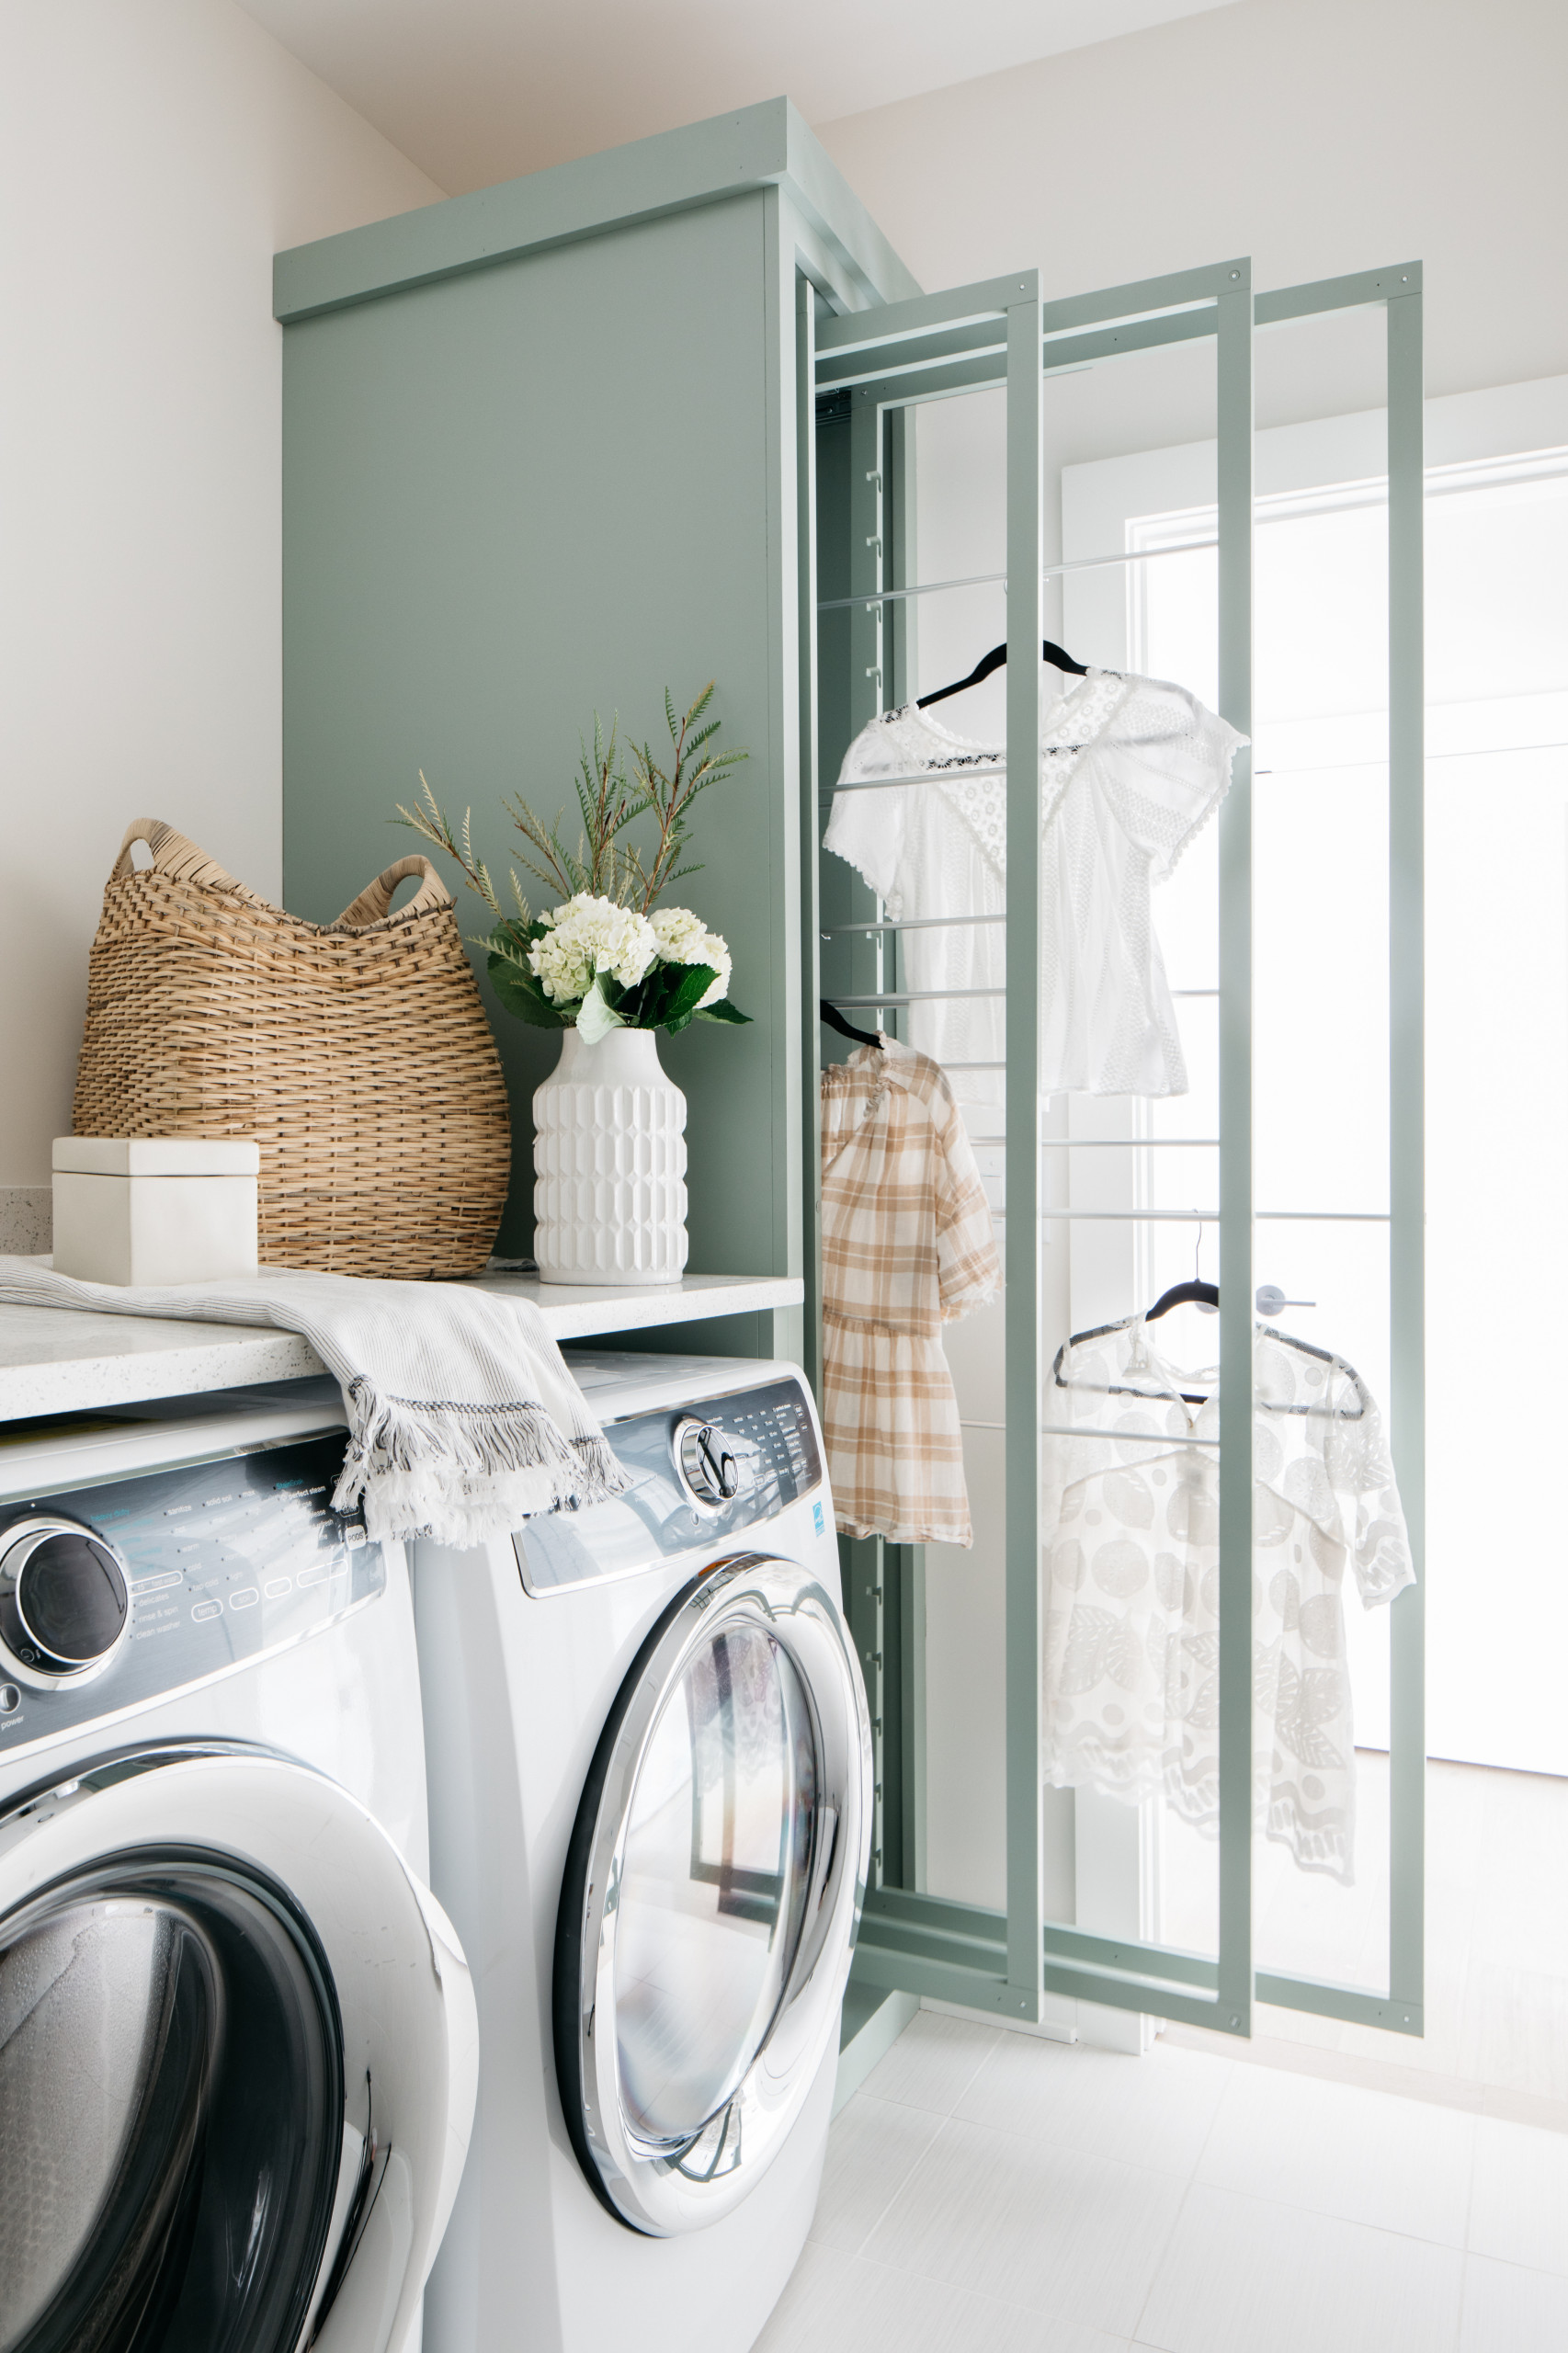 23 Utility Rooms With Clothes-drying Racks | Houzz UK